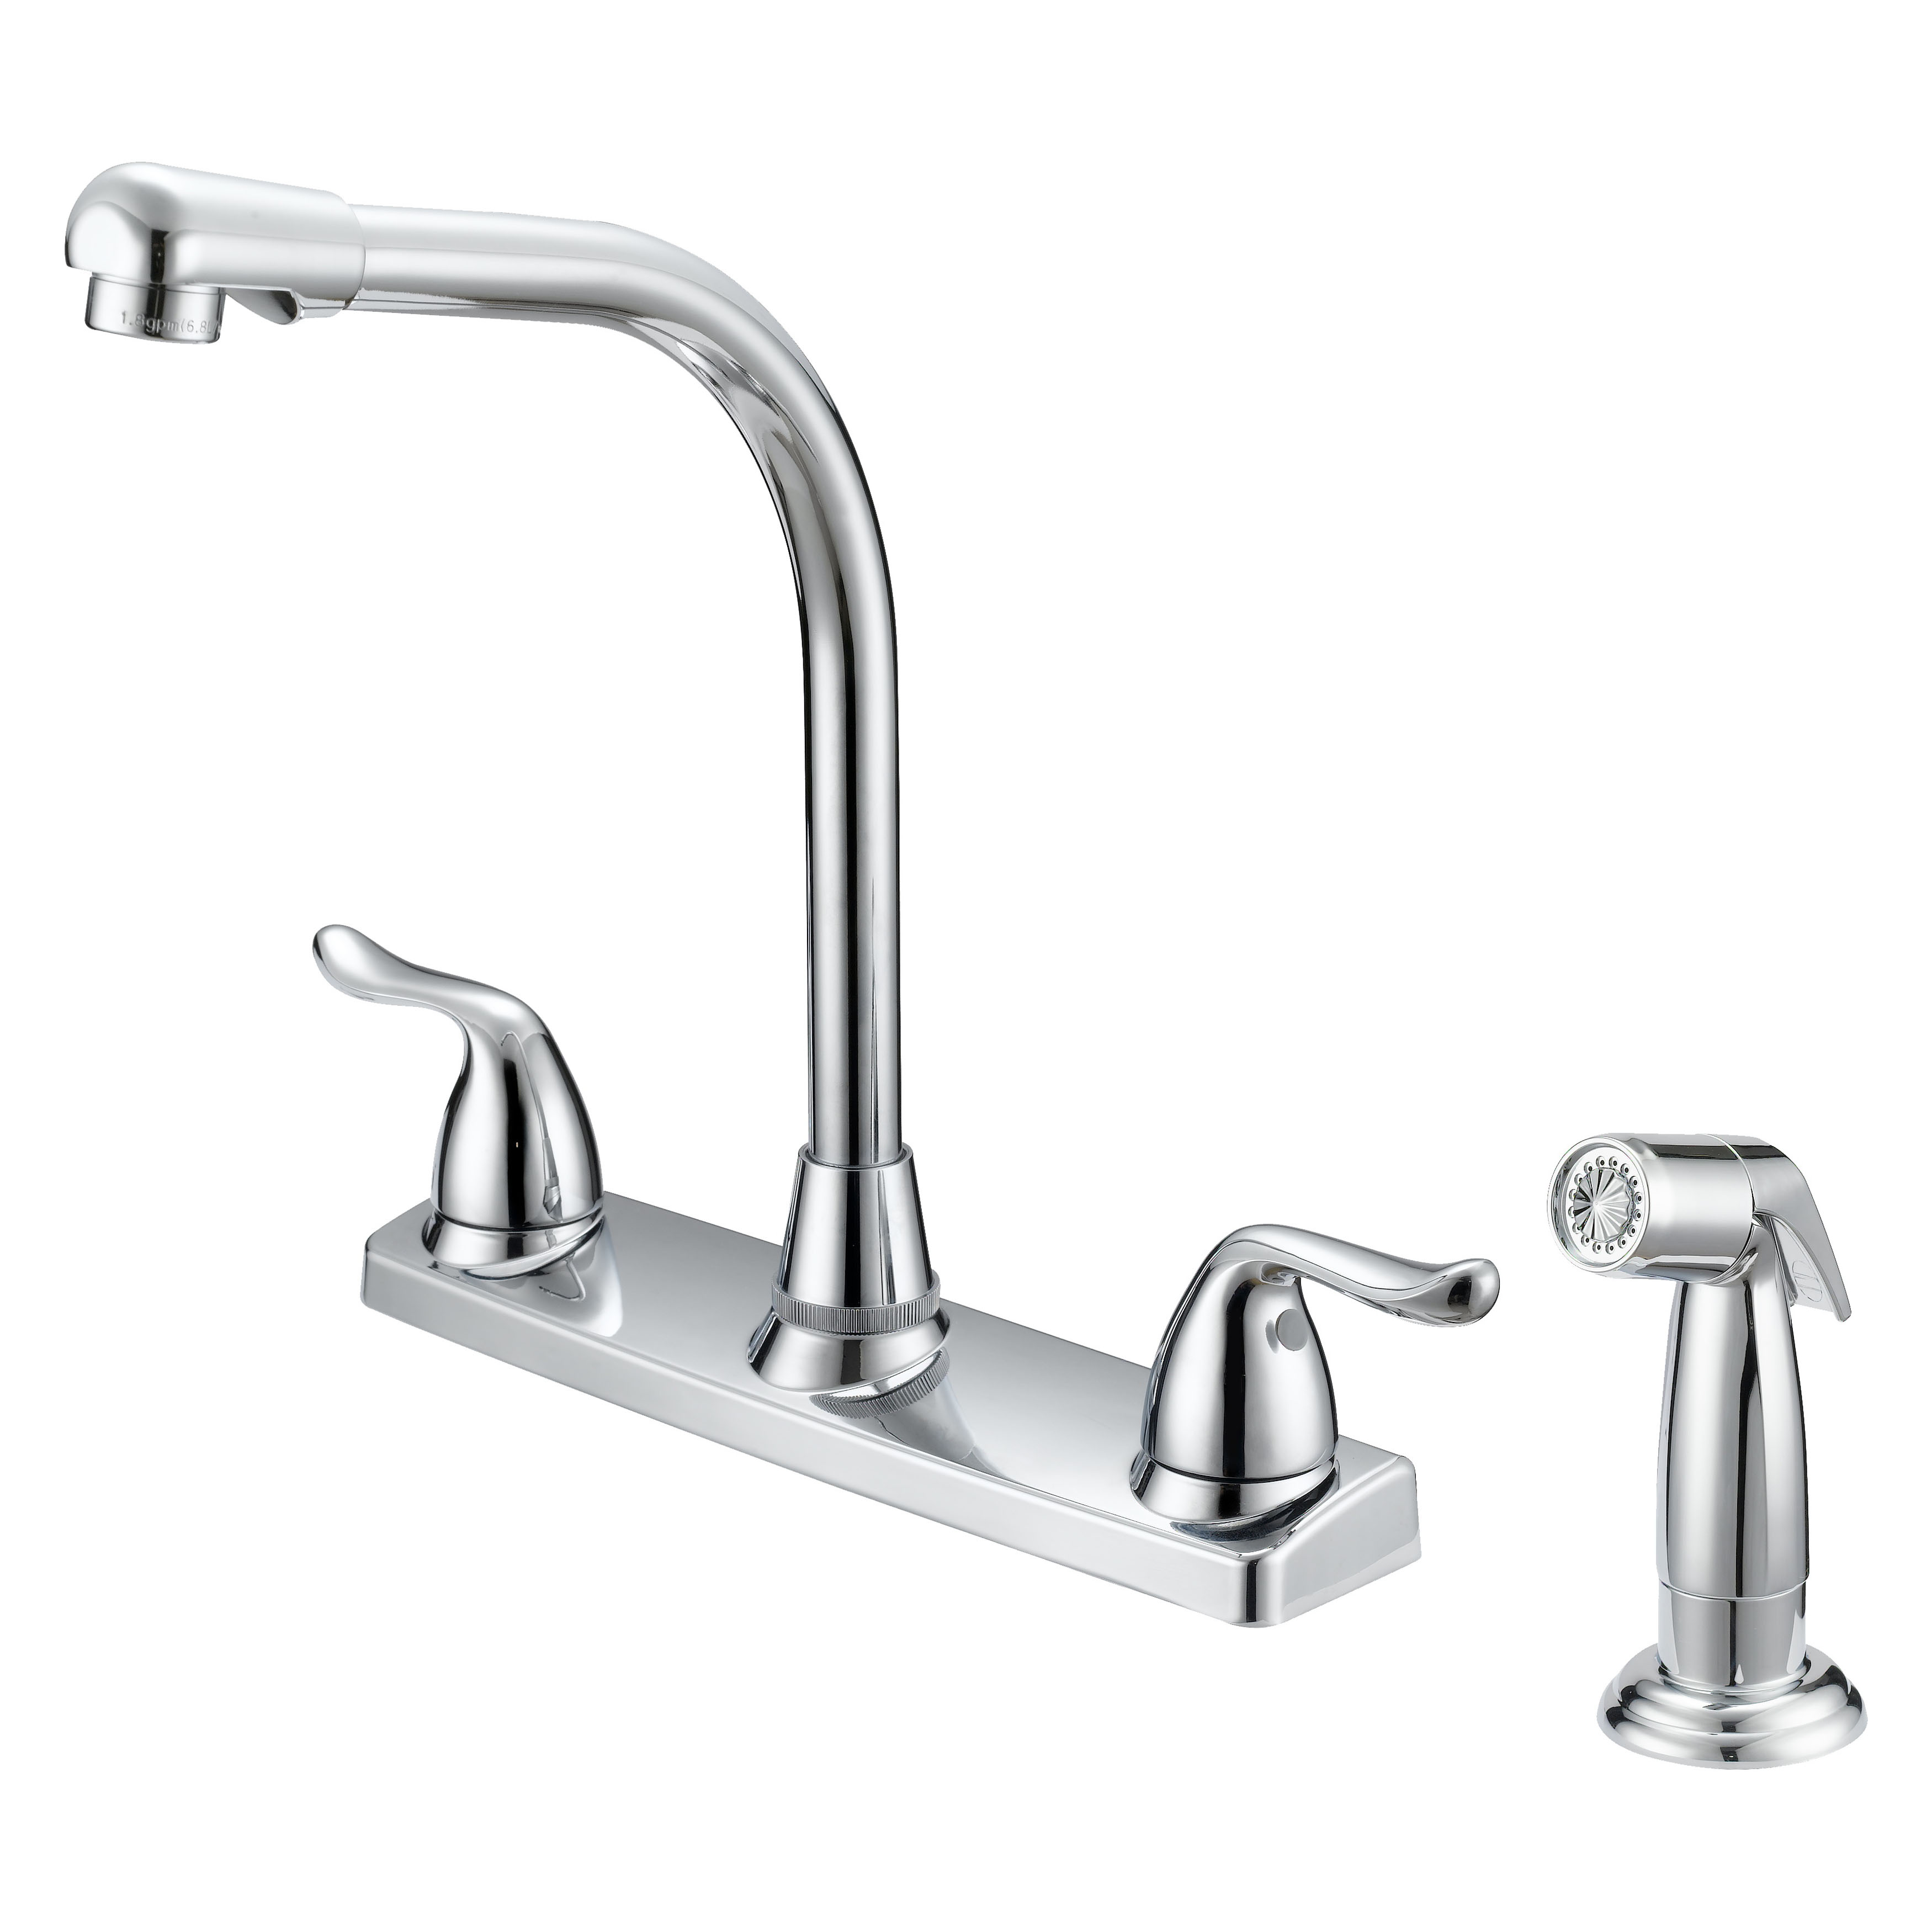 F8F10036CP Kitchen Faucet, 1.8 gpm, 2-Faucet Handle, 4-Faucet Hole, Metal/Plastic, Chrome Plated